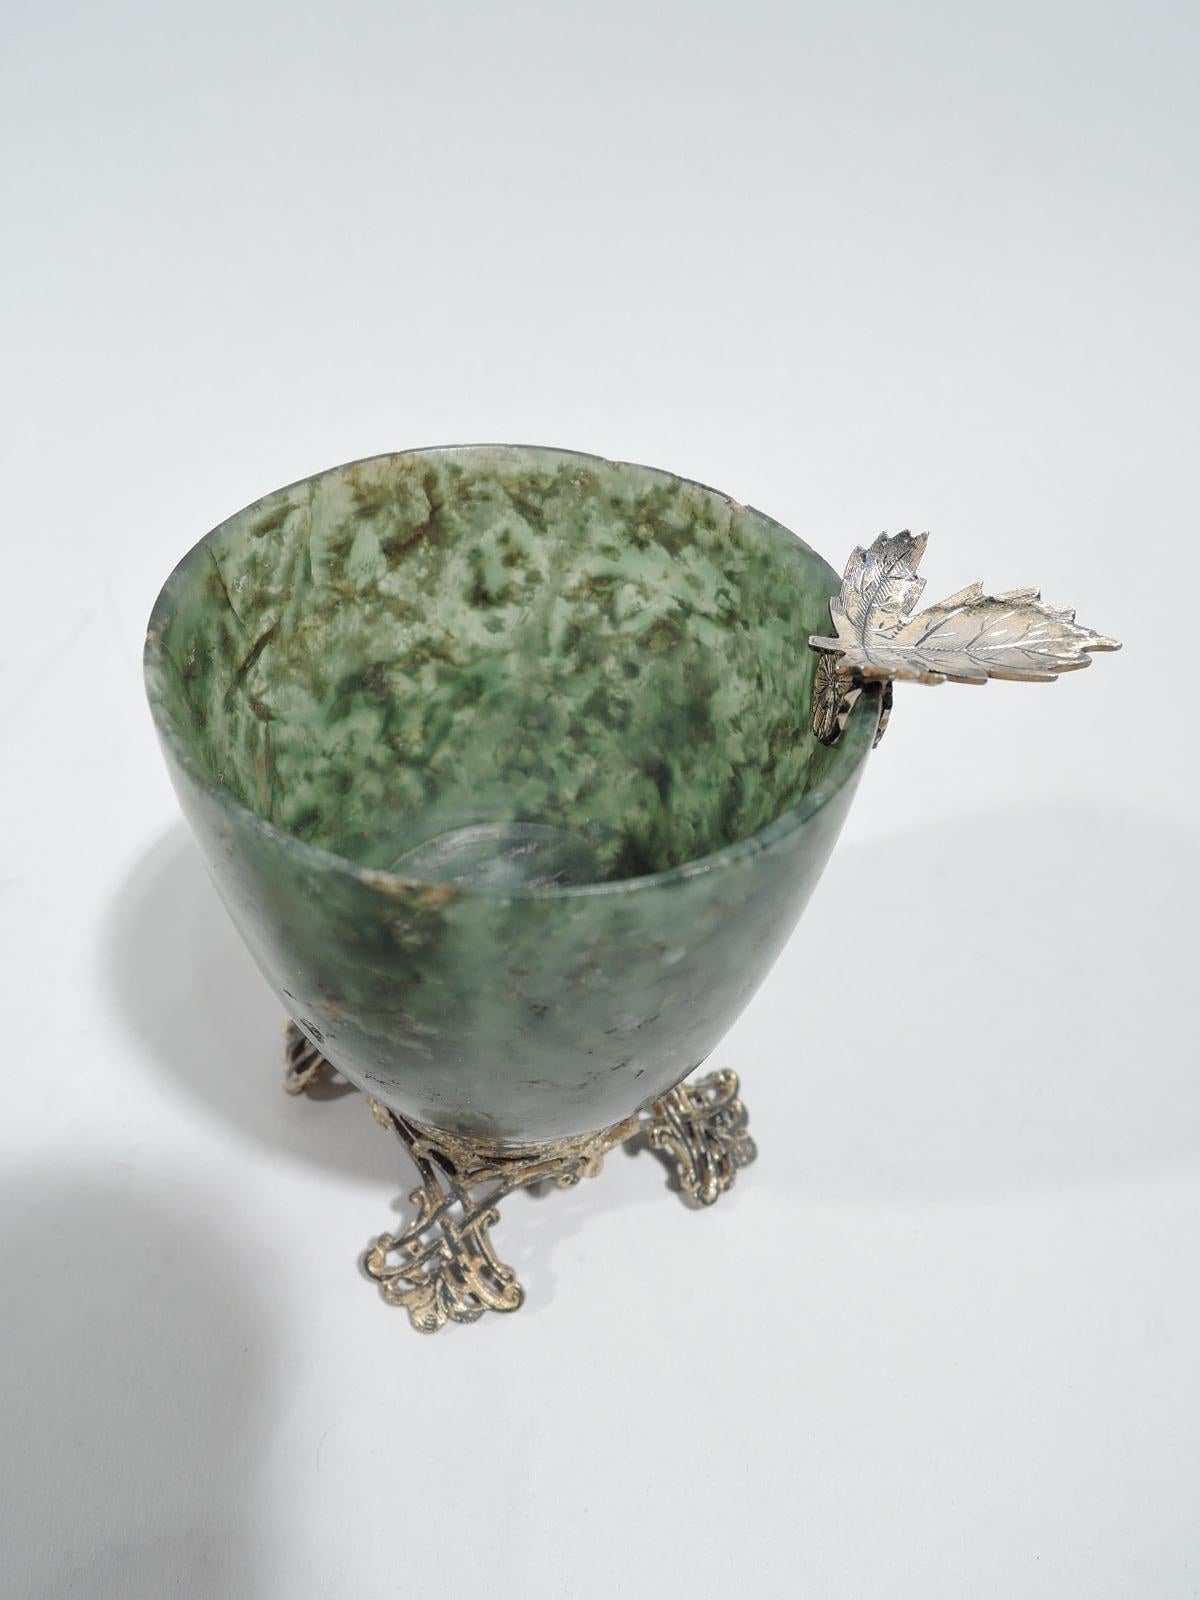 Chinese-style bowl, ca 1920. Mottled green hardstone urn on silver gilt fretwork base with 4 splayed supports. A pretty ornament that works as an ashtray with silver gilt leaf cradle mounted to rim. Marked “Edward I Farmer / Sterling”. 

Overall